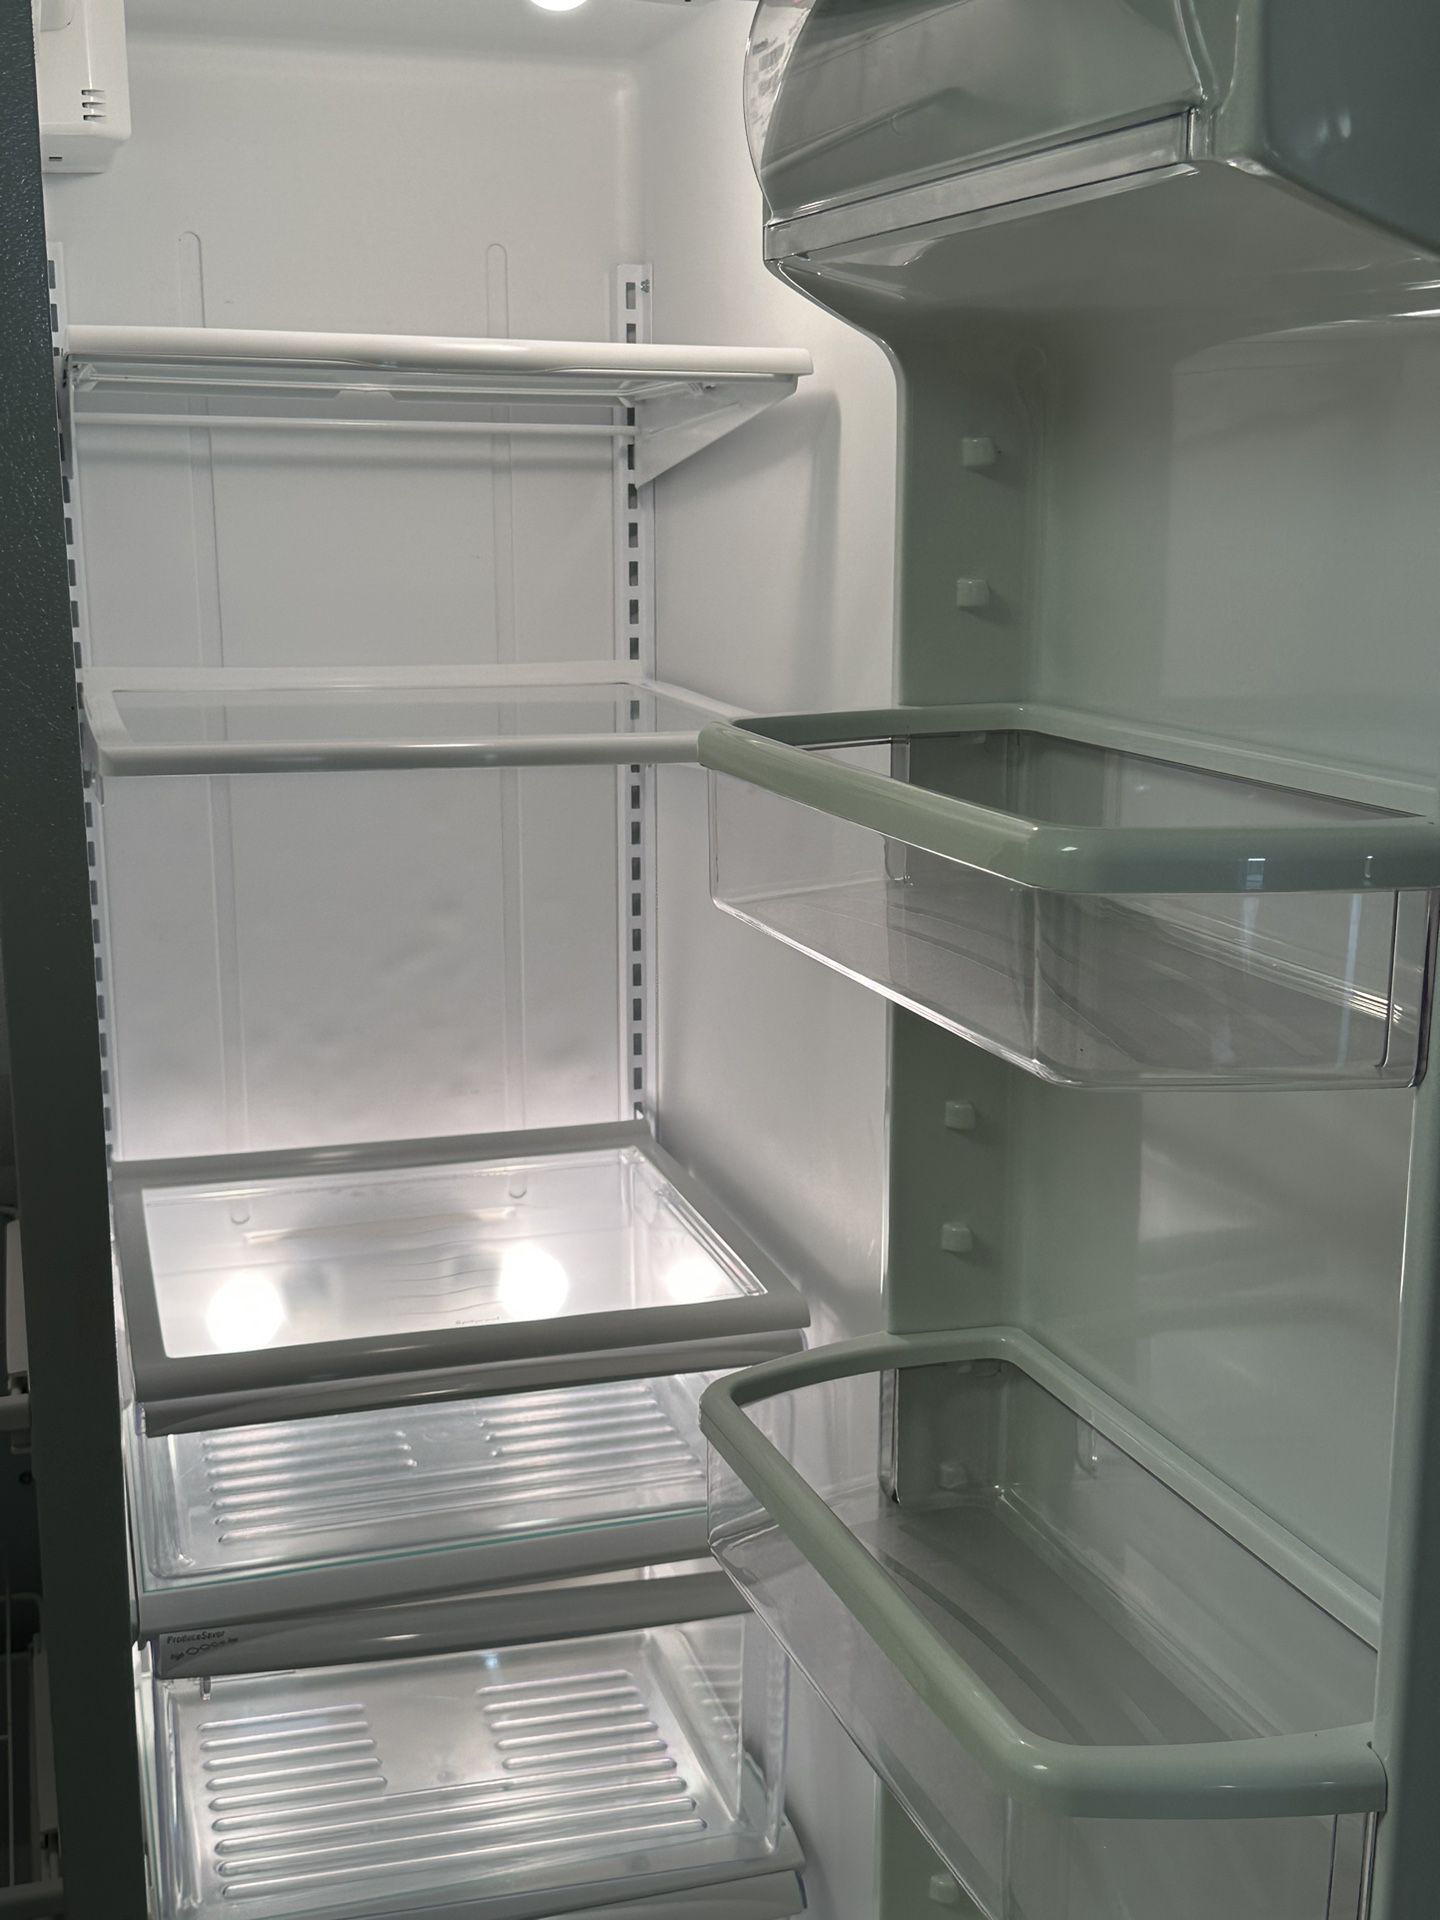 Well Maintained Kenmore fridge